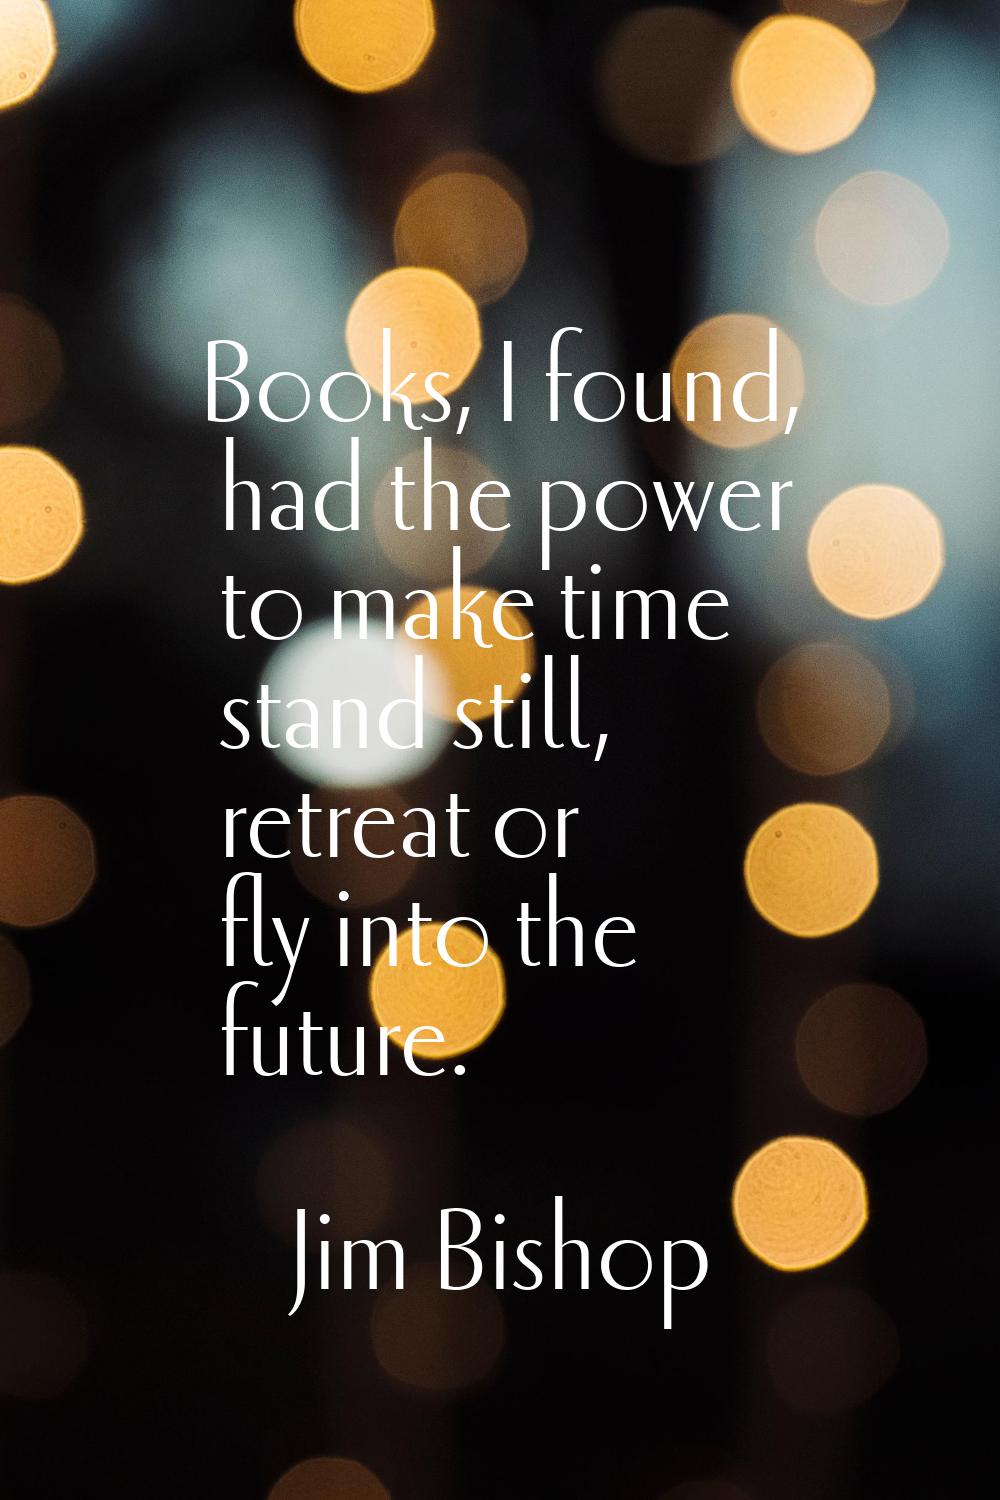 Books, I found, had the power to make time stand still, retreat or fly into the future.